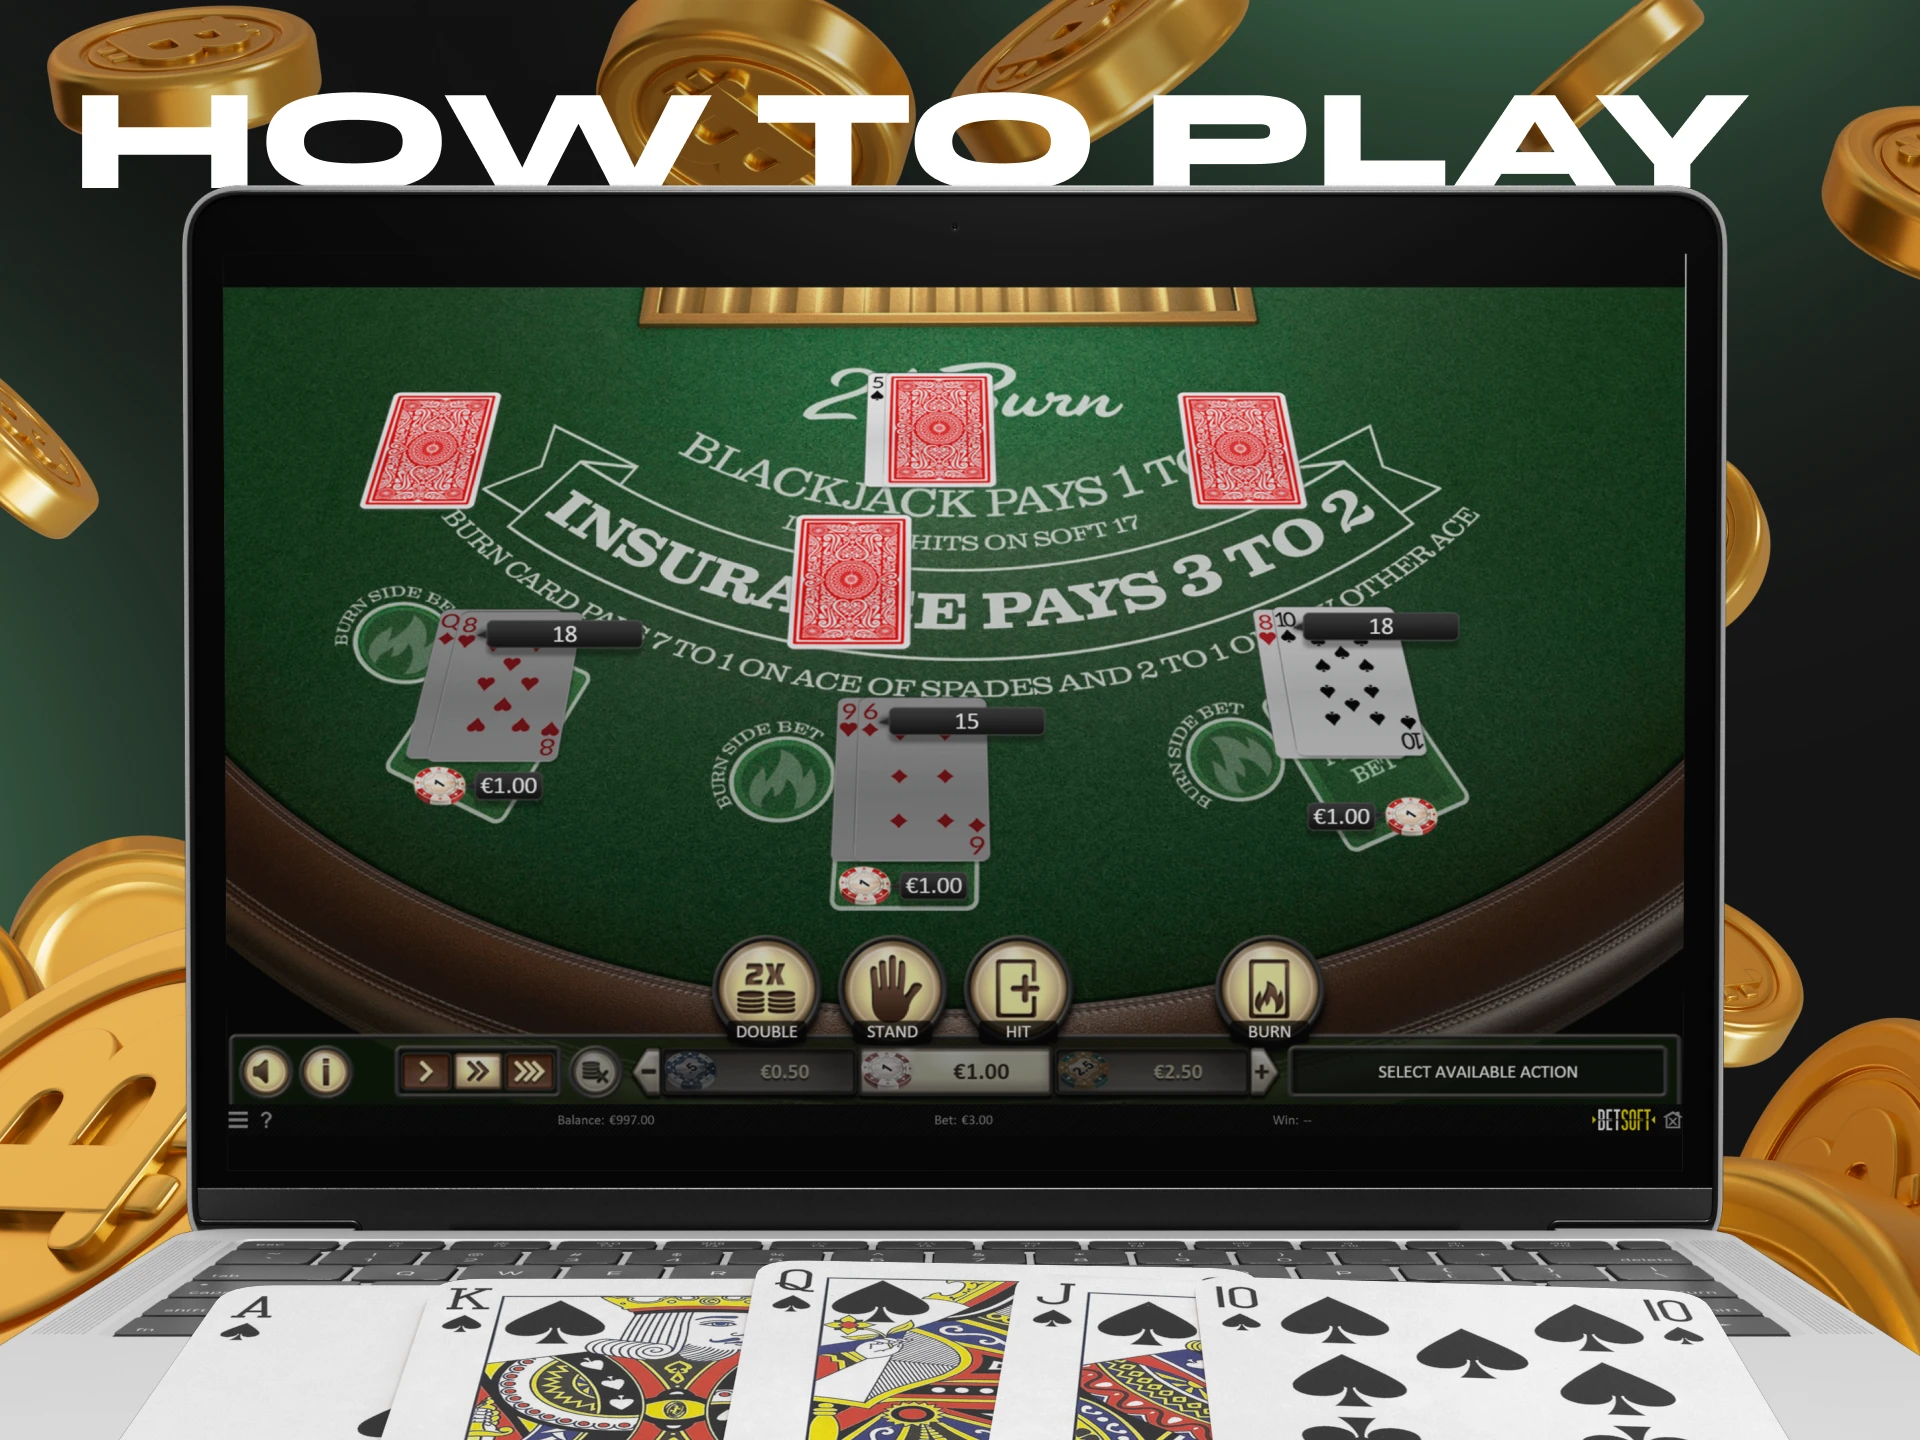 Playing blackjack using cryptocurrency is very simple.